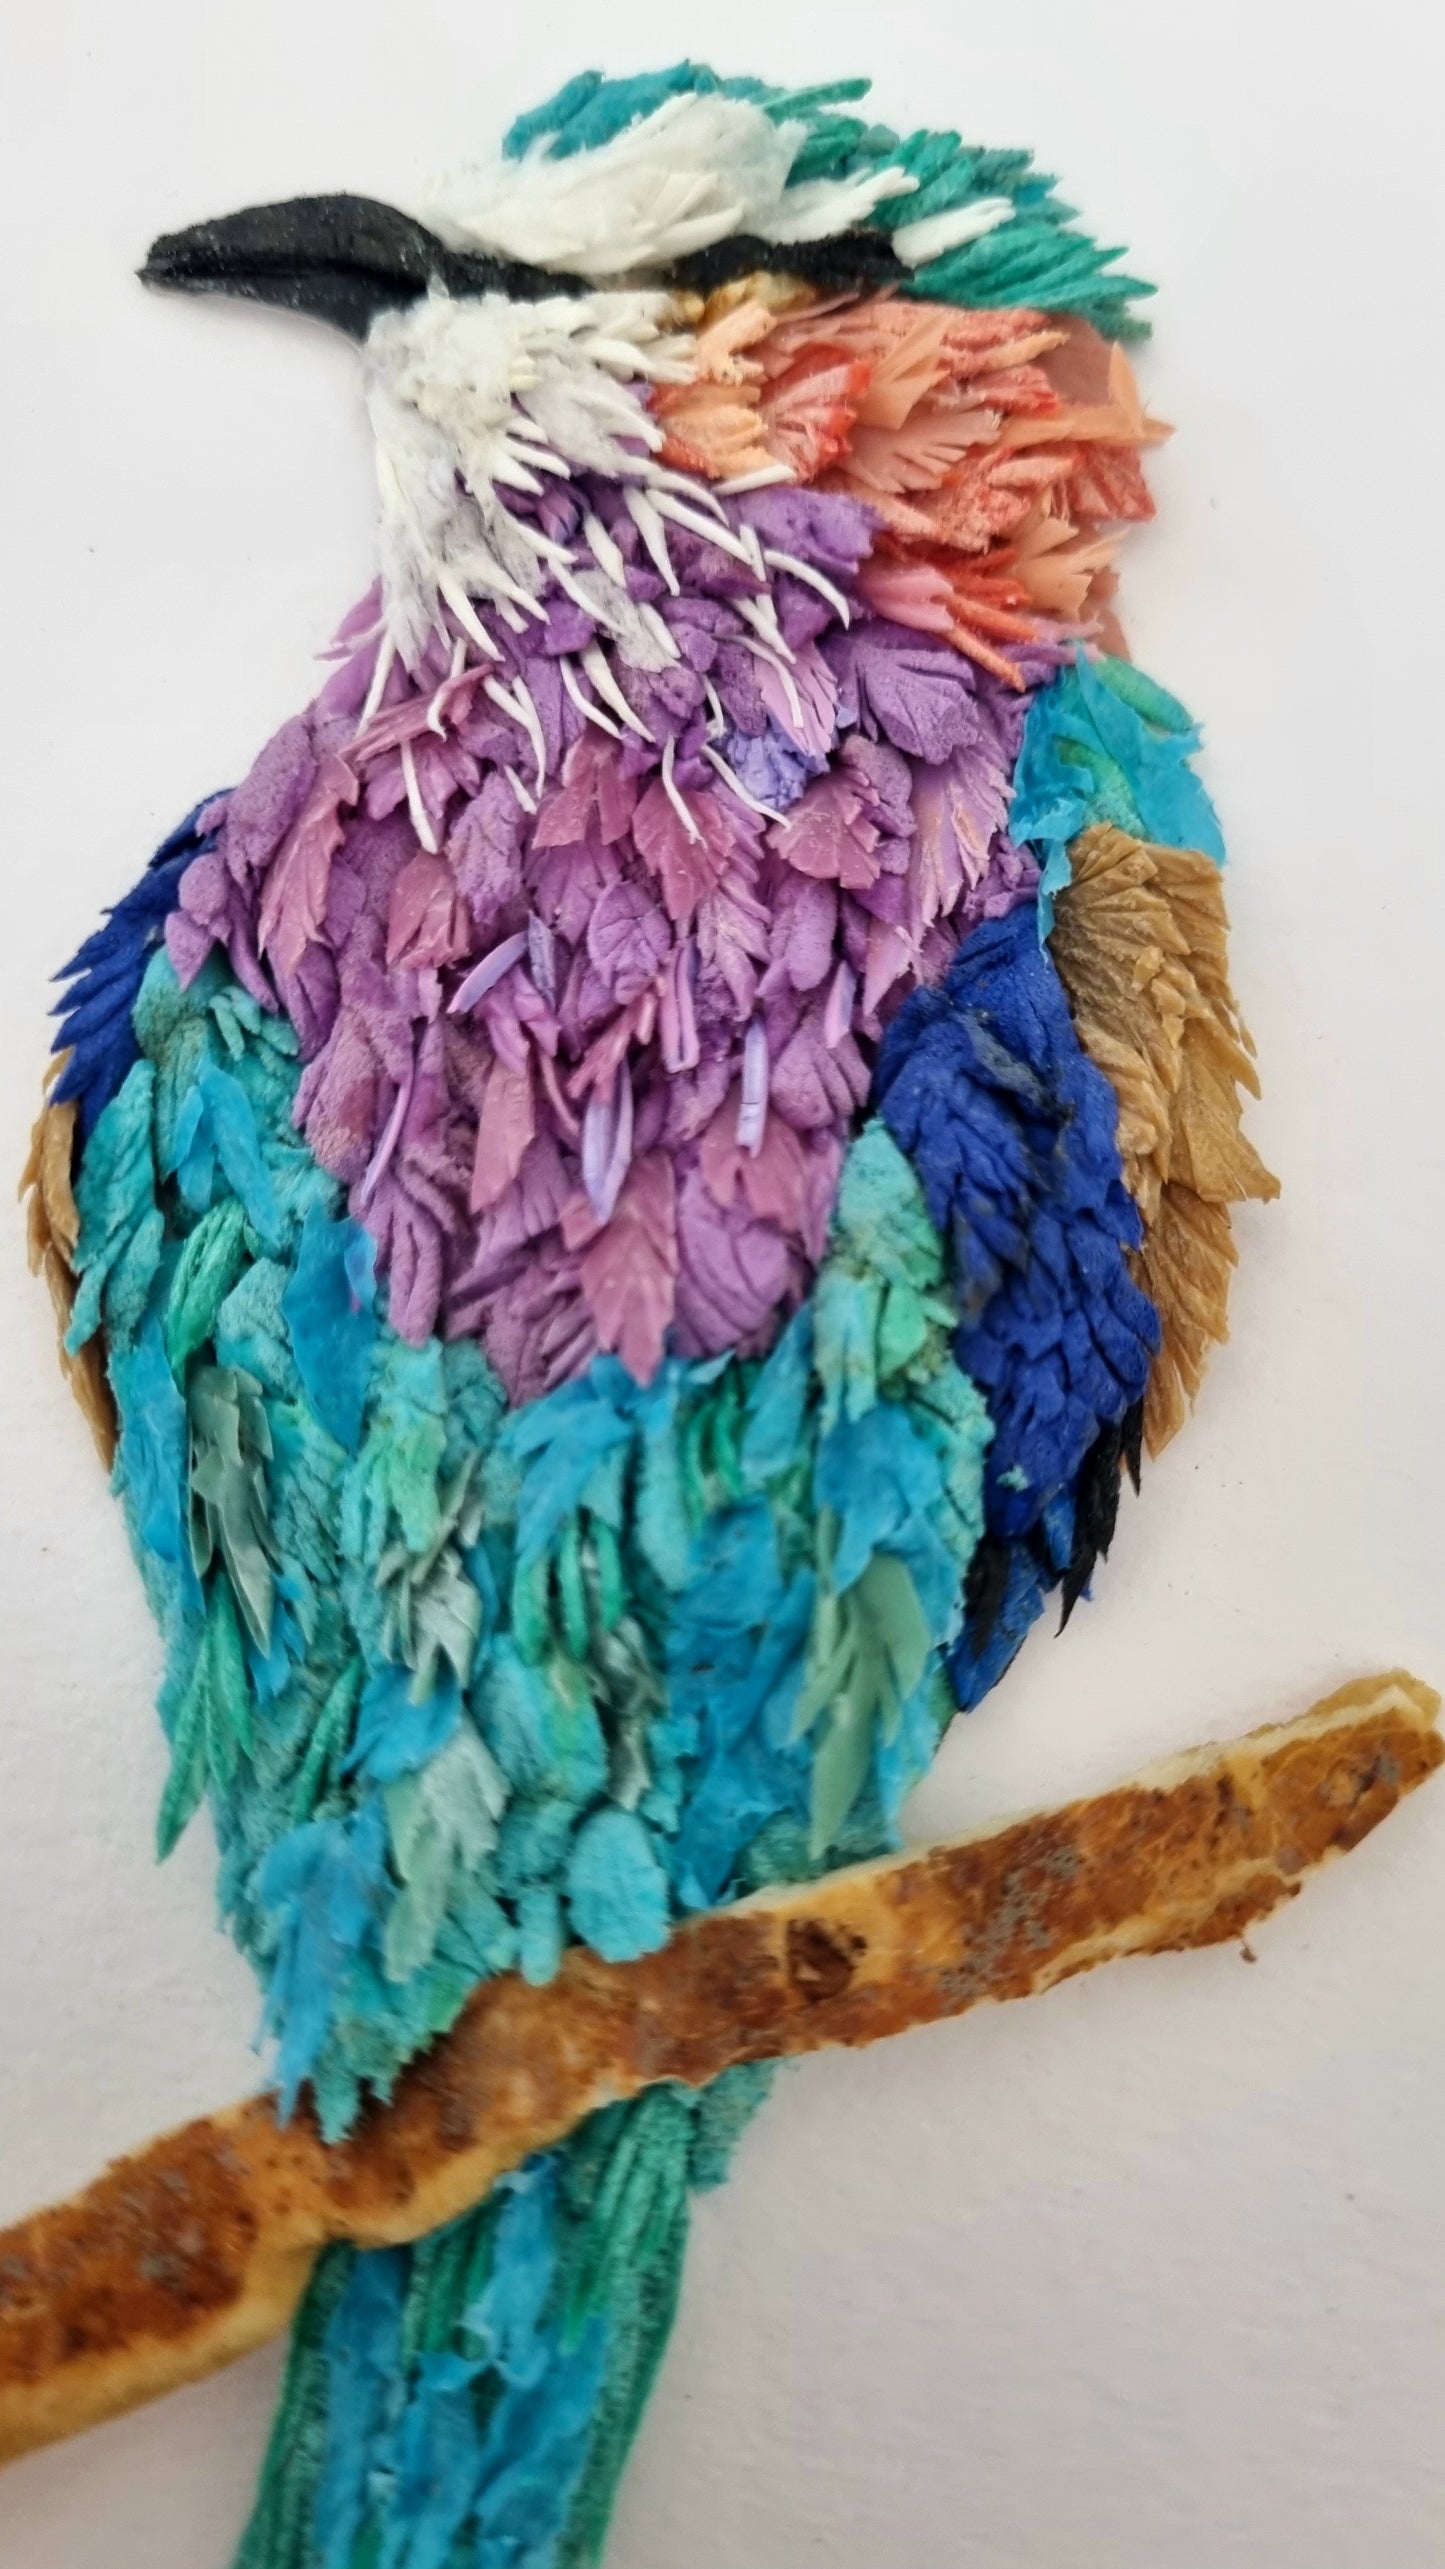 Ocean Plastic Art - Lilac breasted roller - Janet Ormond